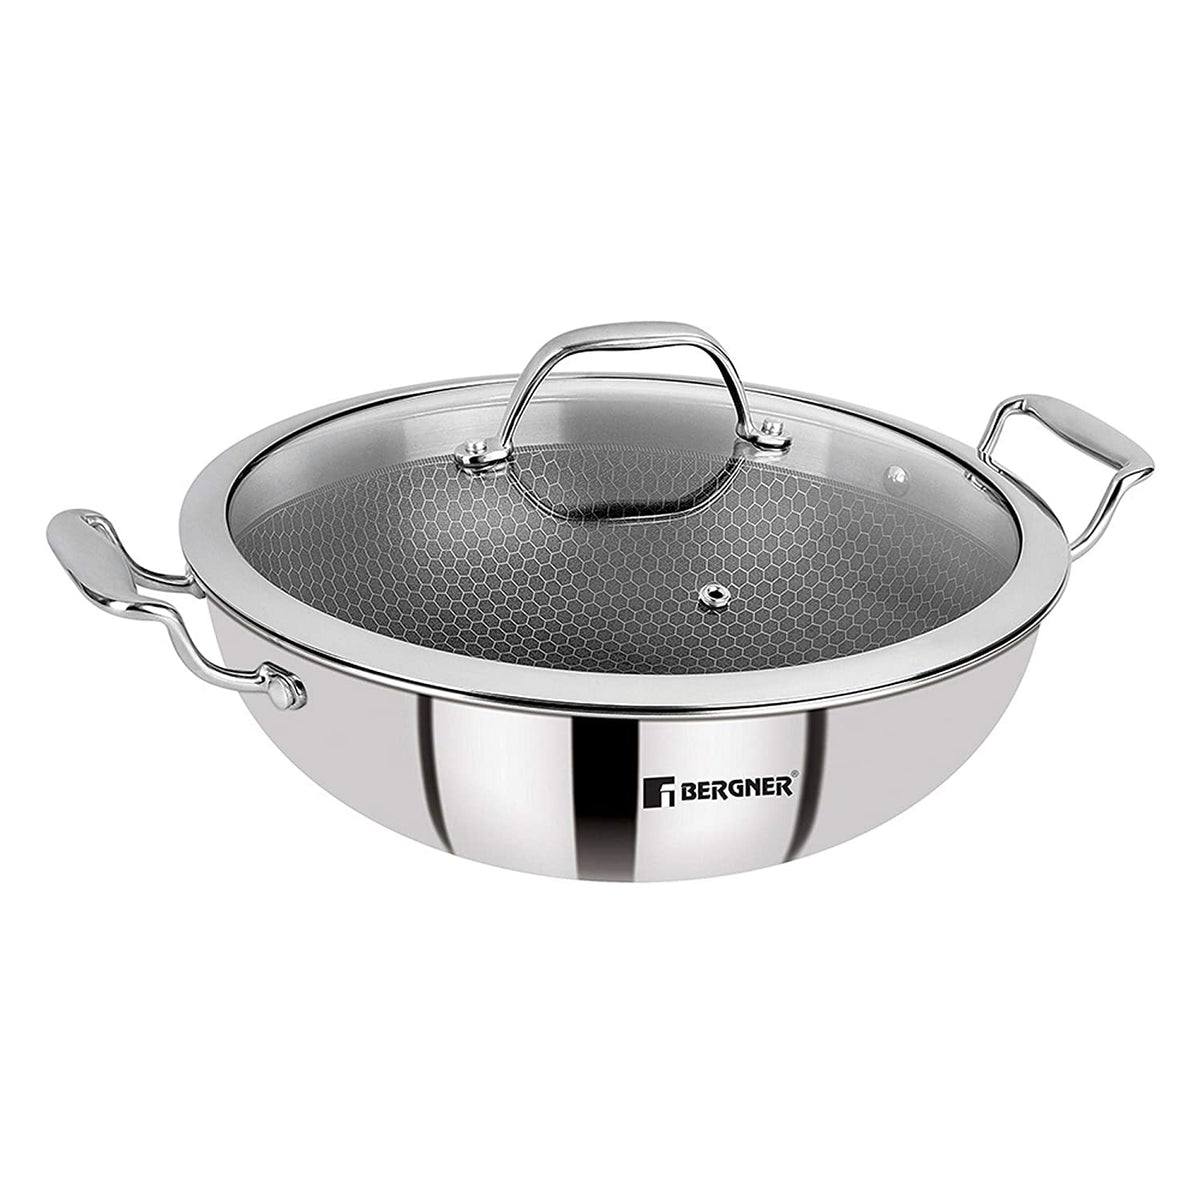 Bergner Stainless Steel Cookware (Kadai) Unboxing and Review 